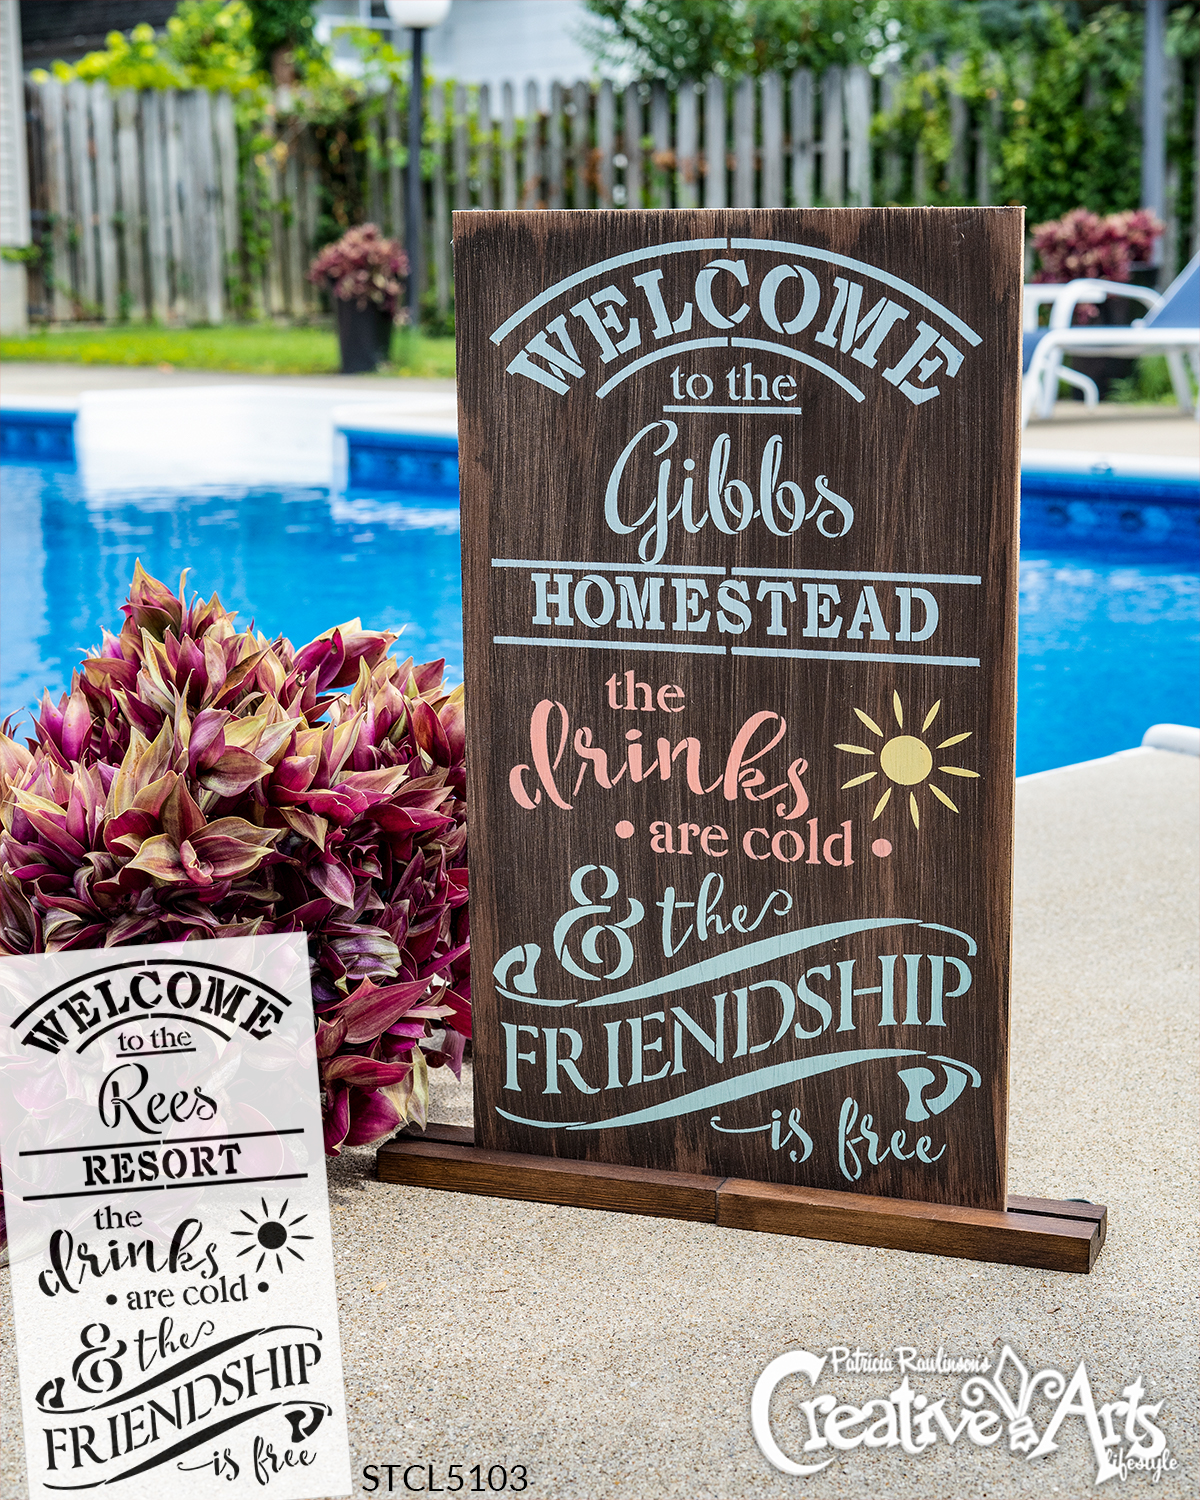 Welcome to the Resort Personalized Stencil by StudioR12 | DIY Friend Home Decor | Craft & Paint Wood Signs Reusable Mylar Template | (12 x 21 INCHES)